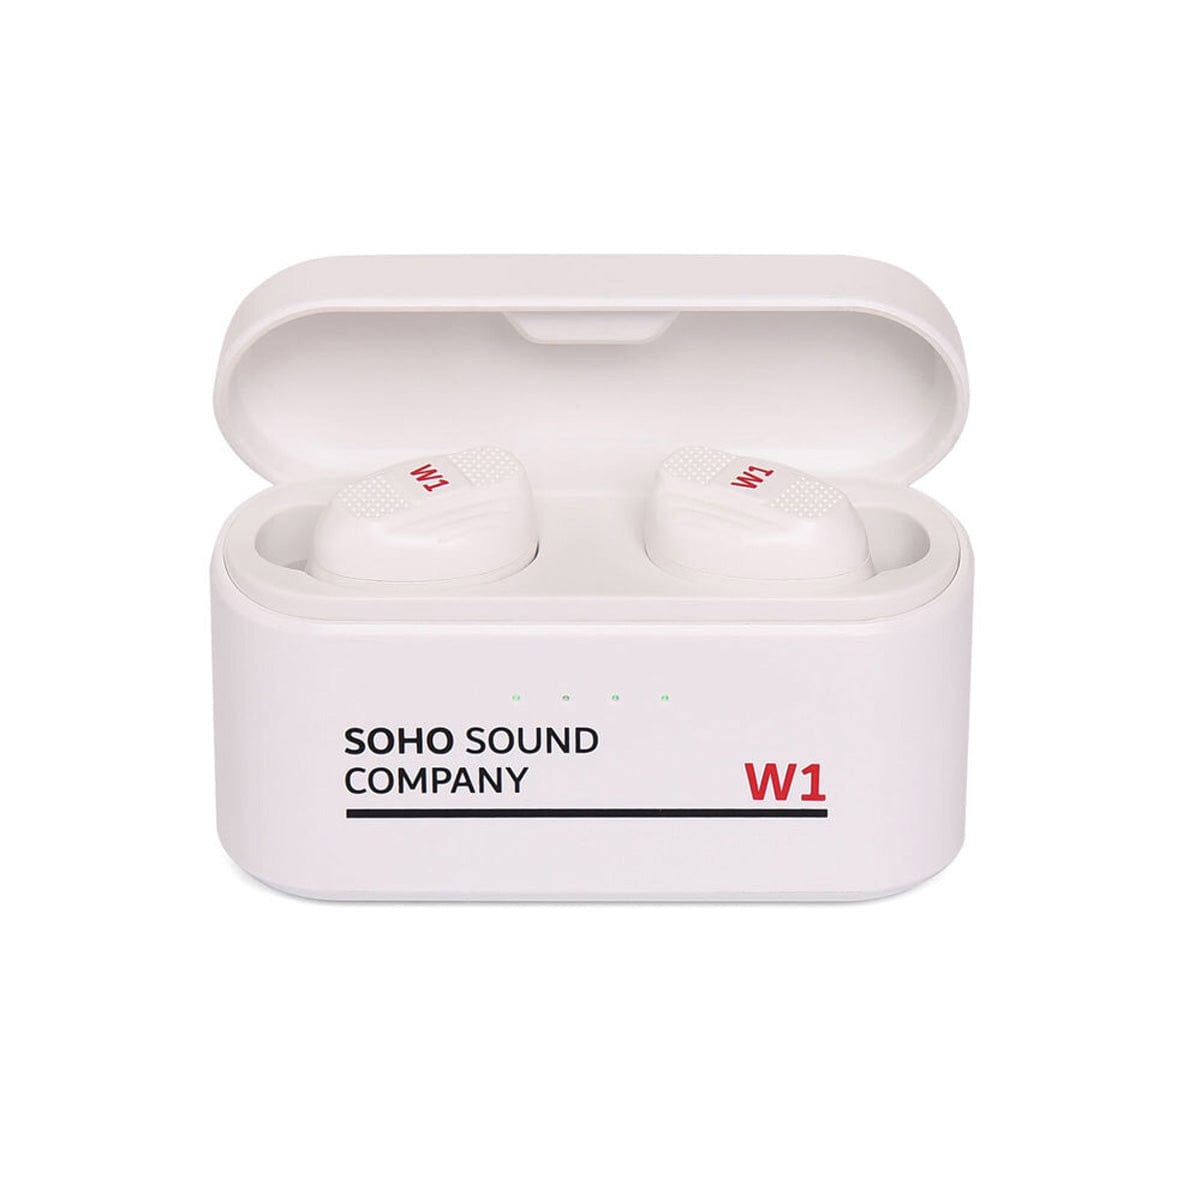 SOHO SOUND MADE IN THE UK - PRO MUSIC AUSTRALIA Home Page SOHO W1 True Wireless Stereo Bluetooth Earbuds in White Earbuds that can Charge Your Mobile Phone - Byron Music